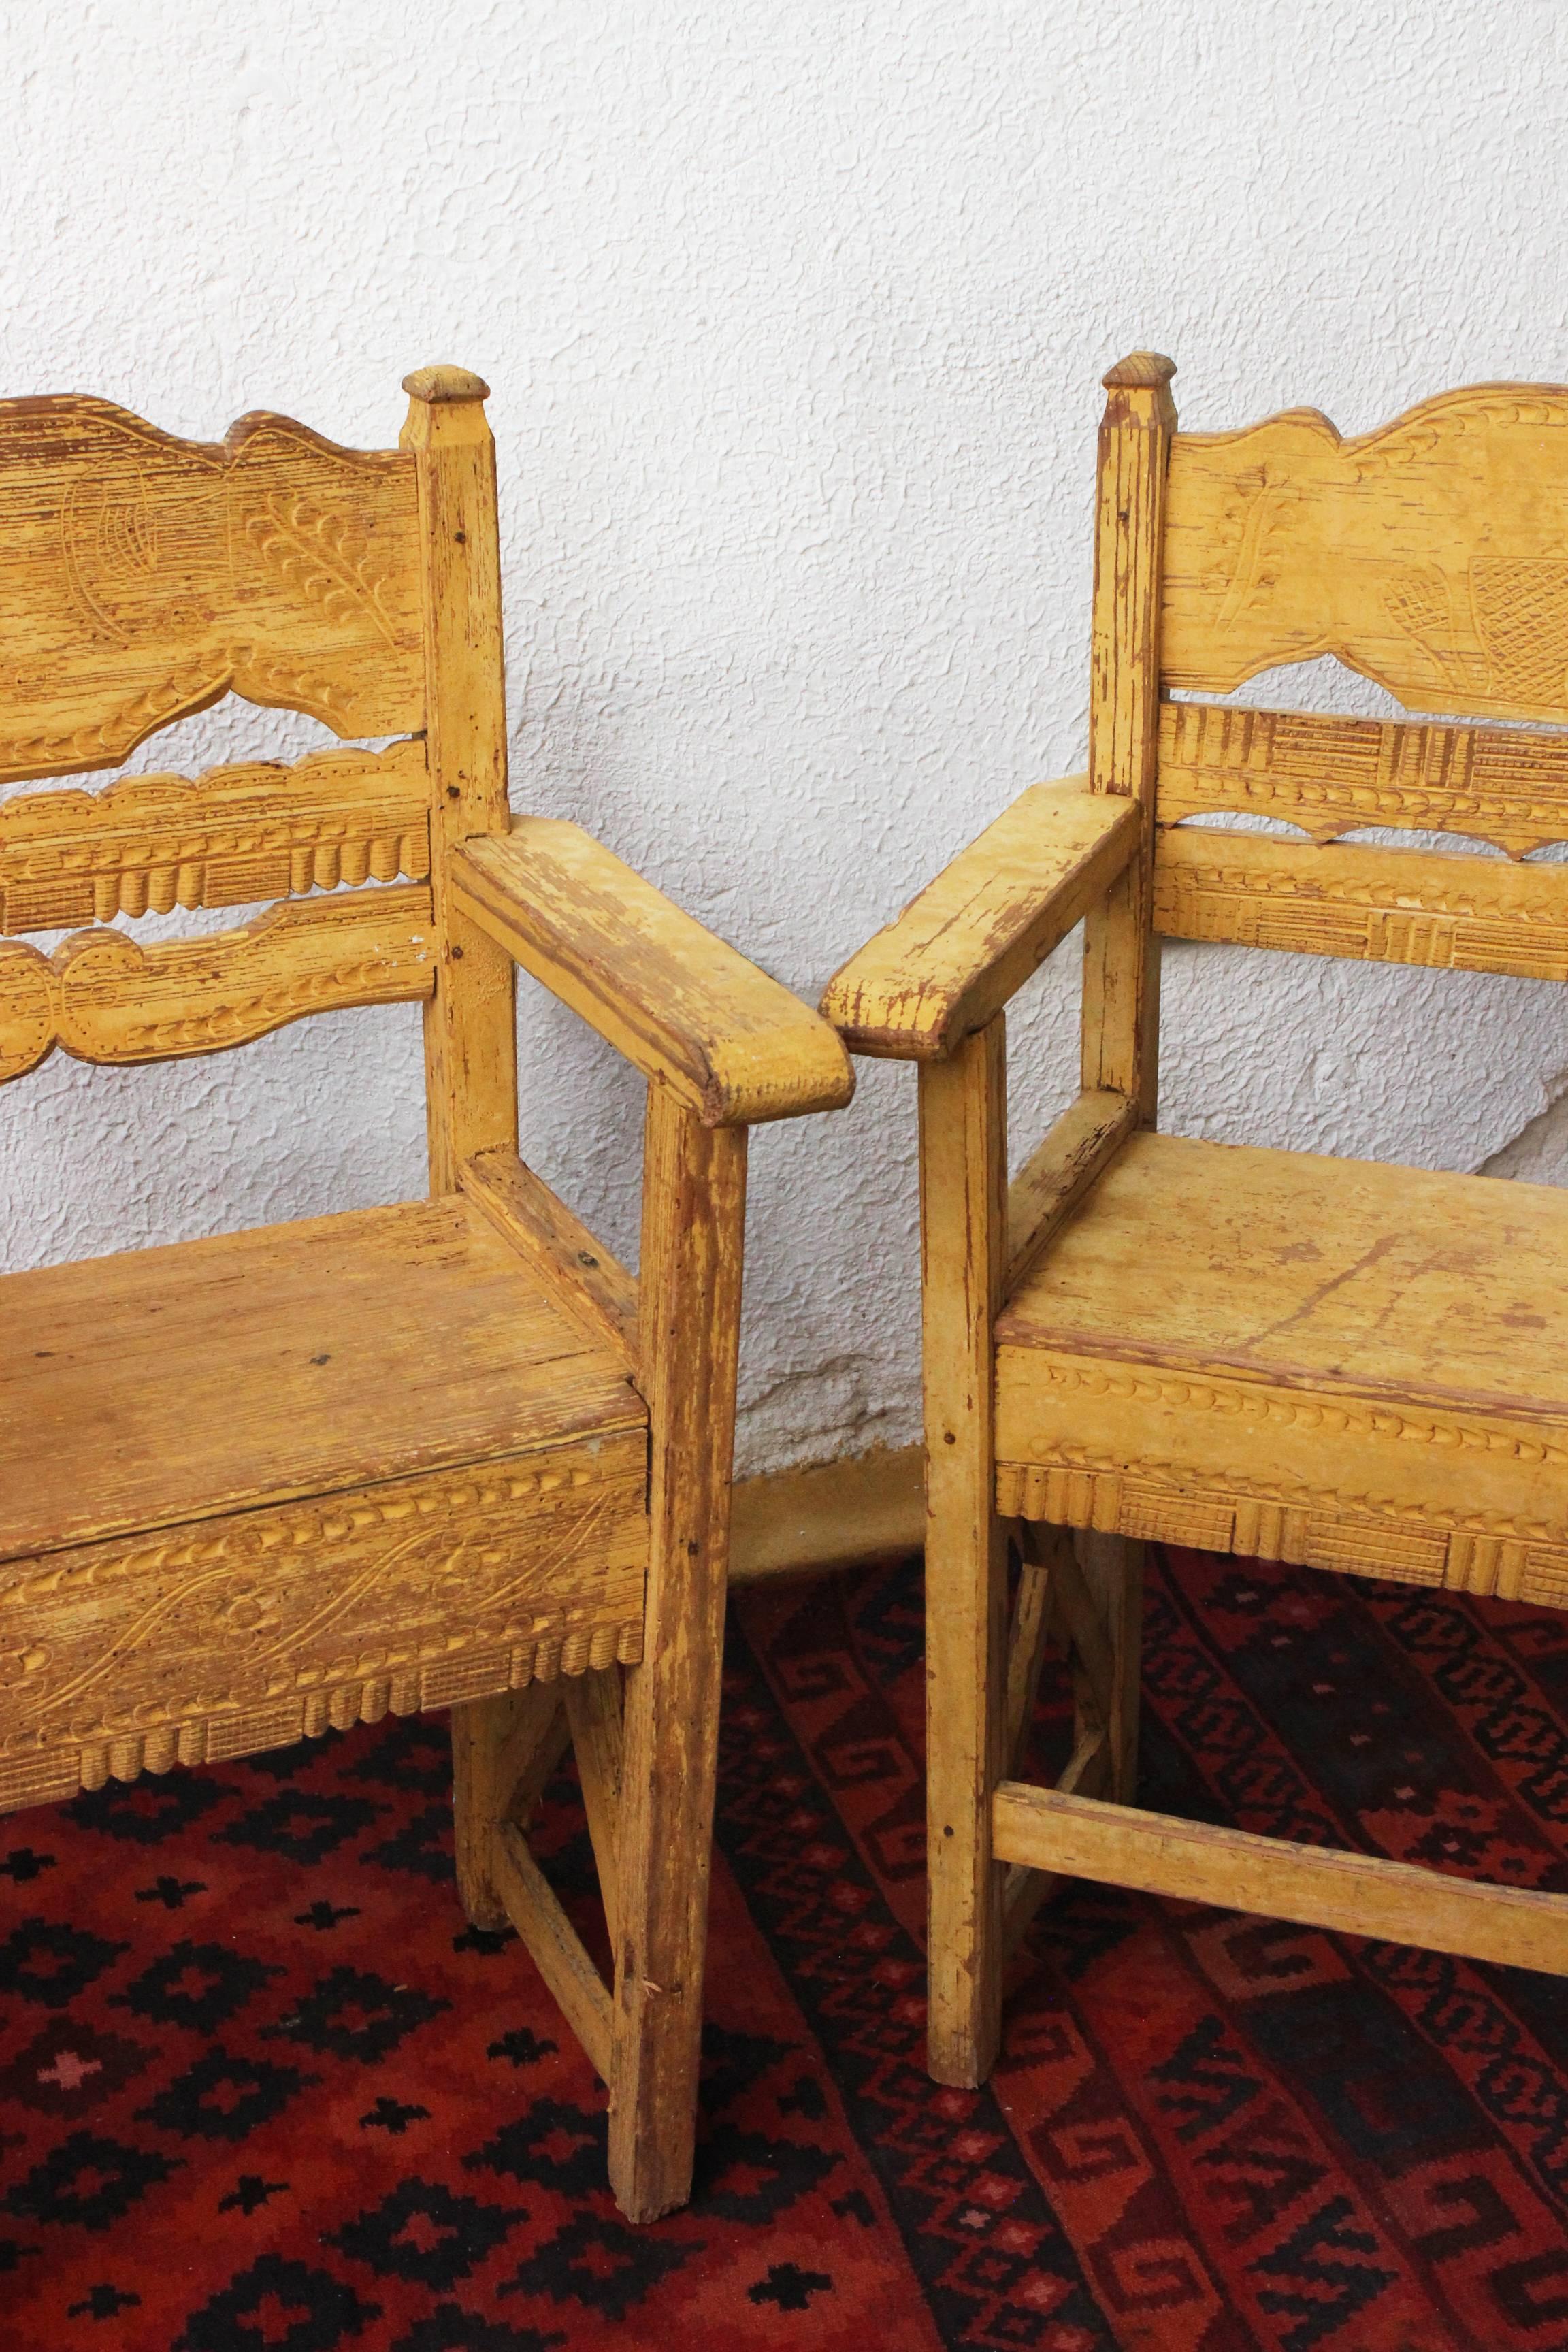 Handmade late 19th century pair of chairs with typical hand carving from Western México.